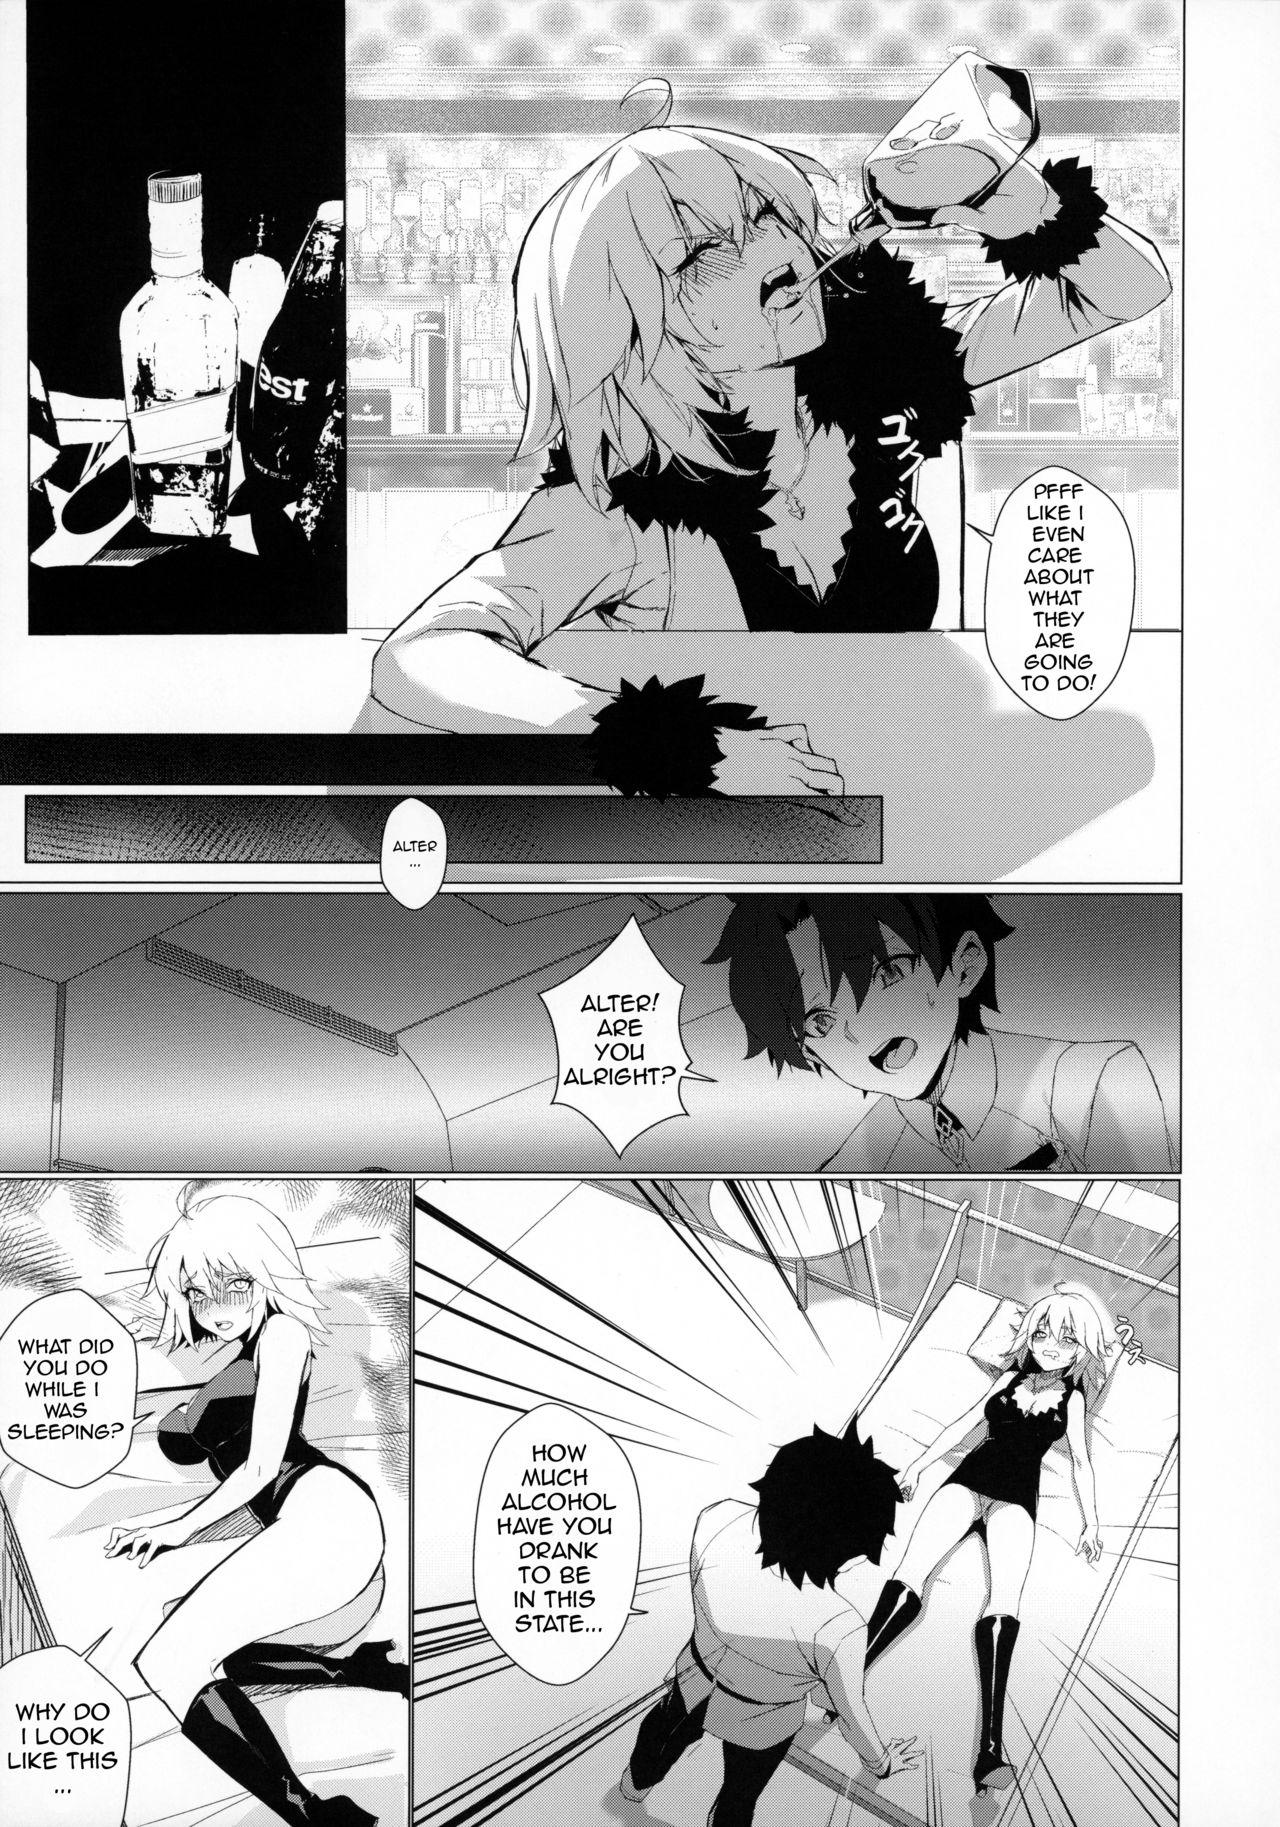 Gaystraight PERROS - Fate grand order Boob - Page 4